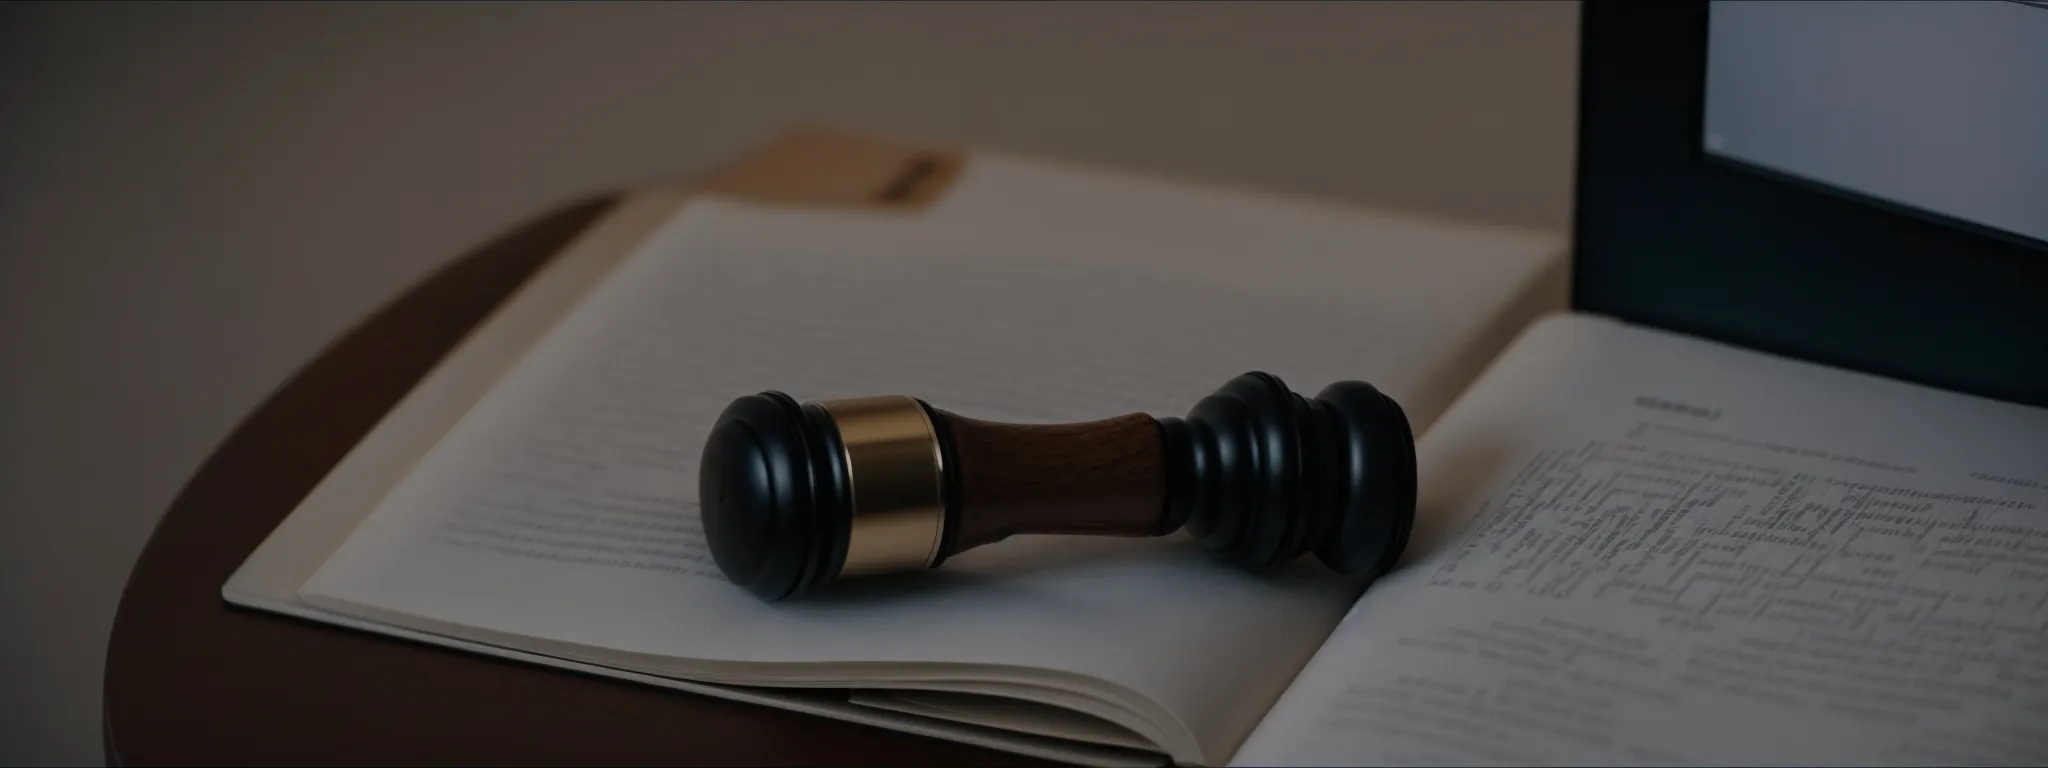 a close-up of a gavel on a desk next to an open law book, with a computer showing a search engine in the background.